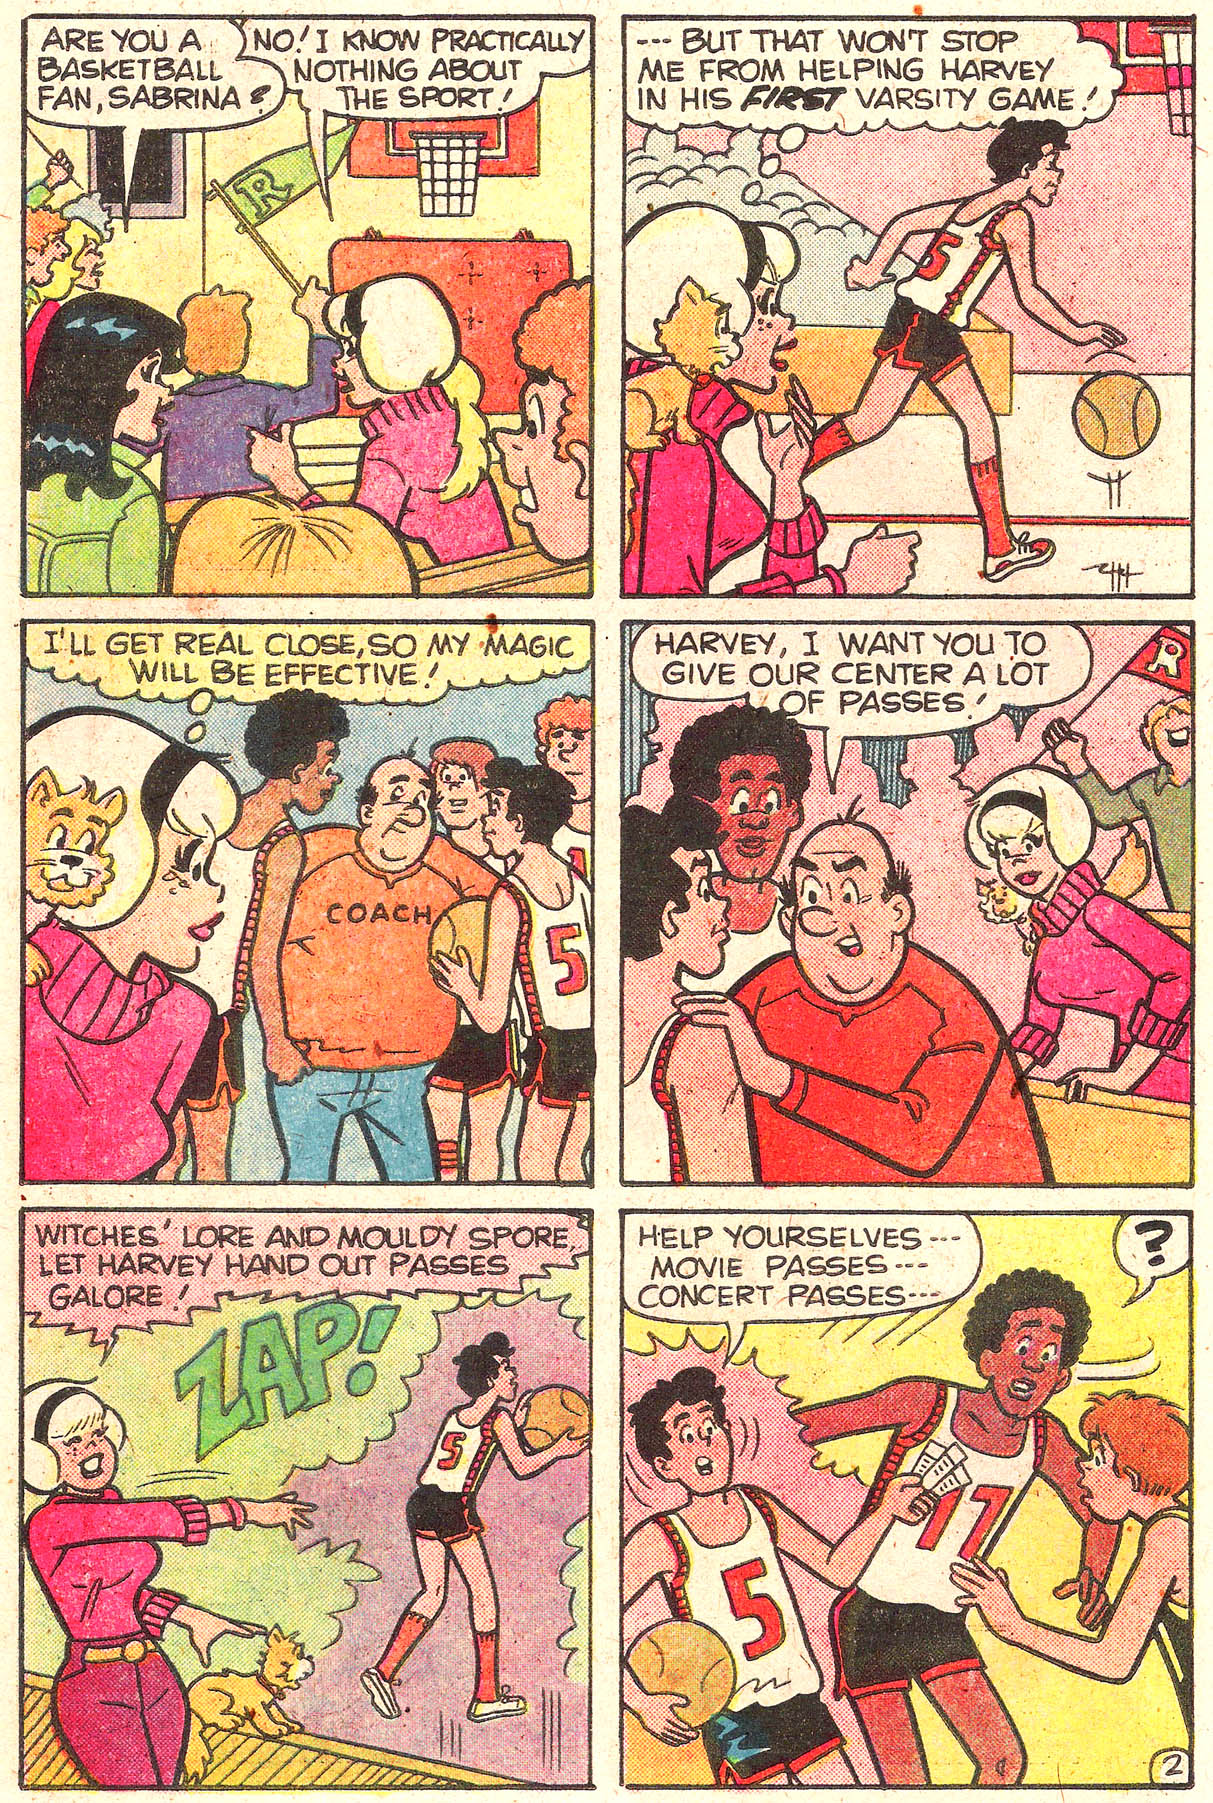 Sabrina The Teenage Witch (1971) Issue #60 #60 - English 14